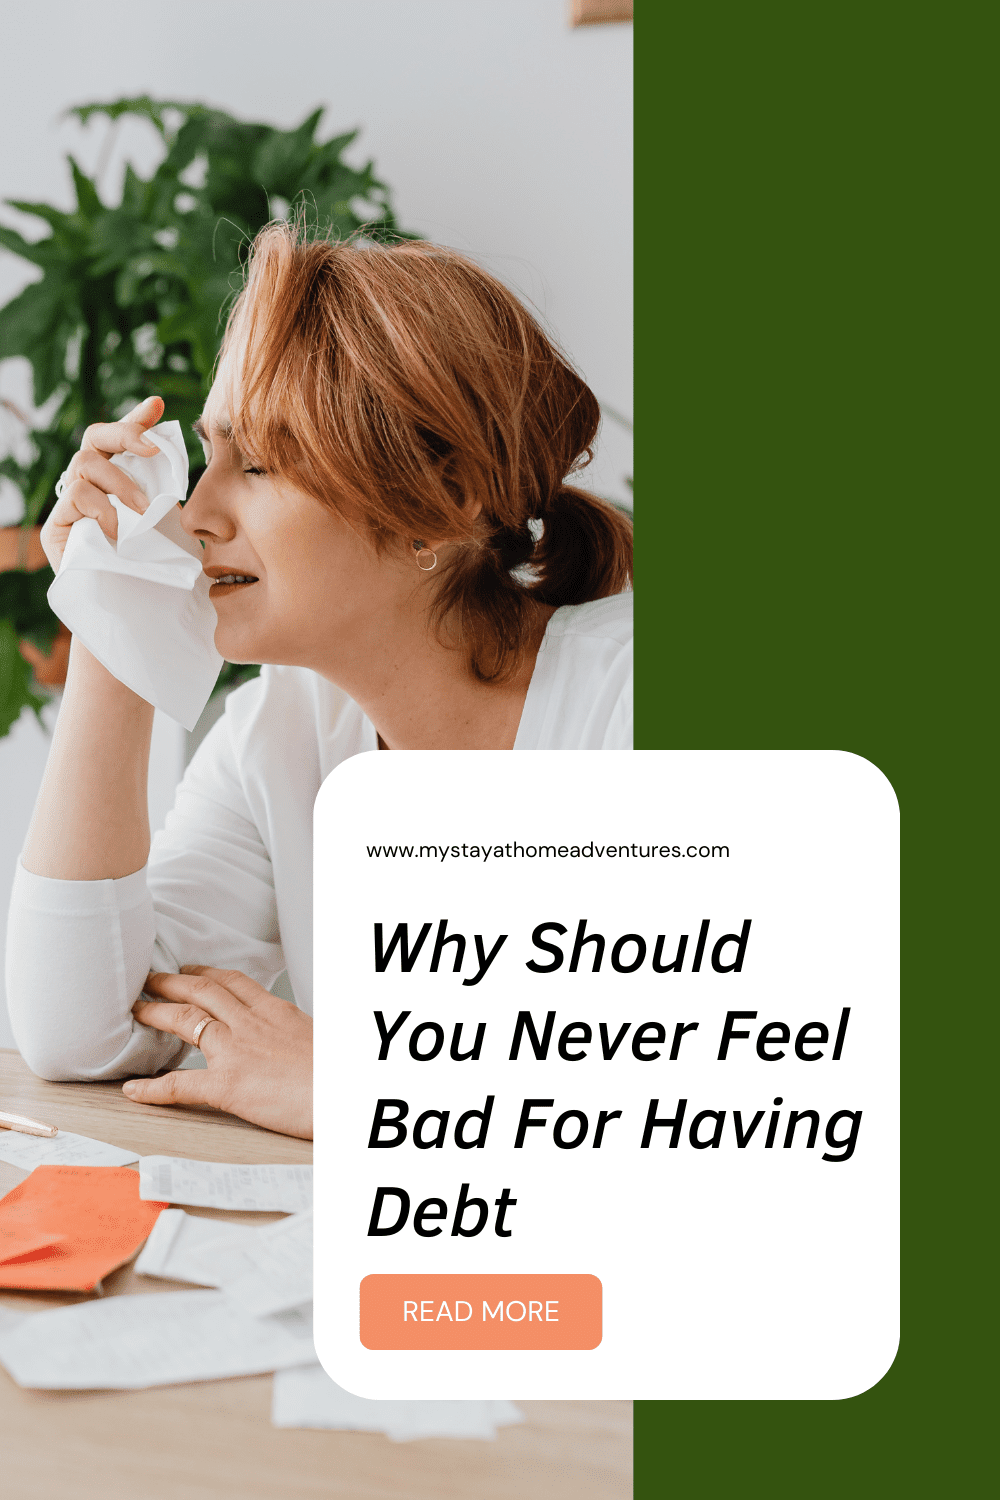 Discover why having debt doesn't mean you've failed financially or that you need to feel ashamed. Instead, learn nine tips to help you manage your debt. via @mystayathome